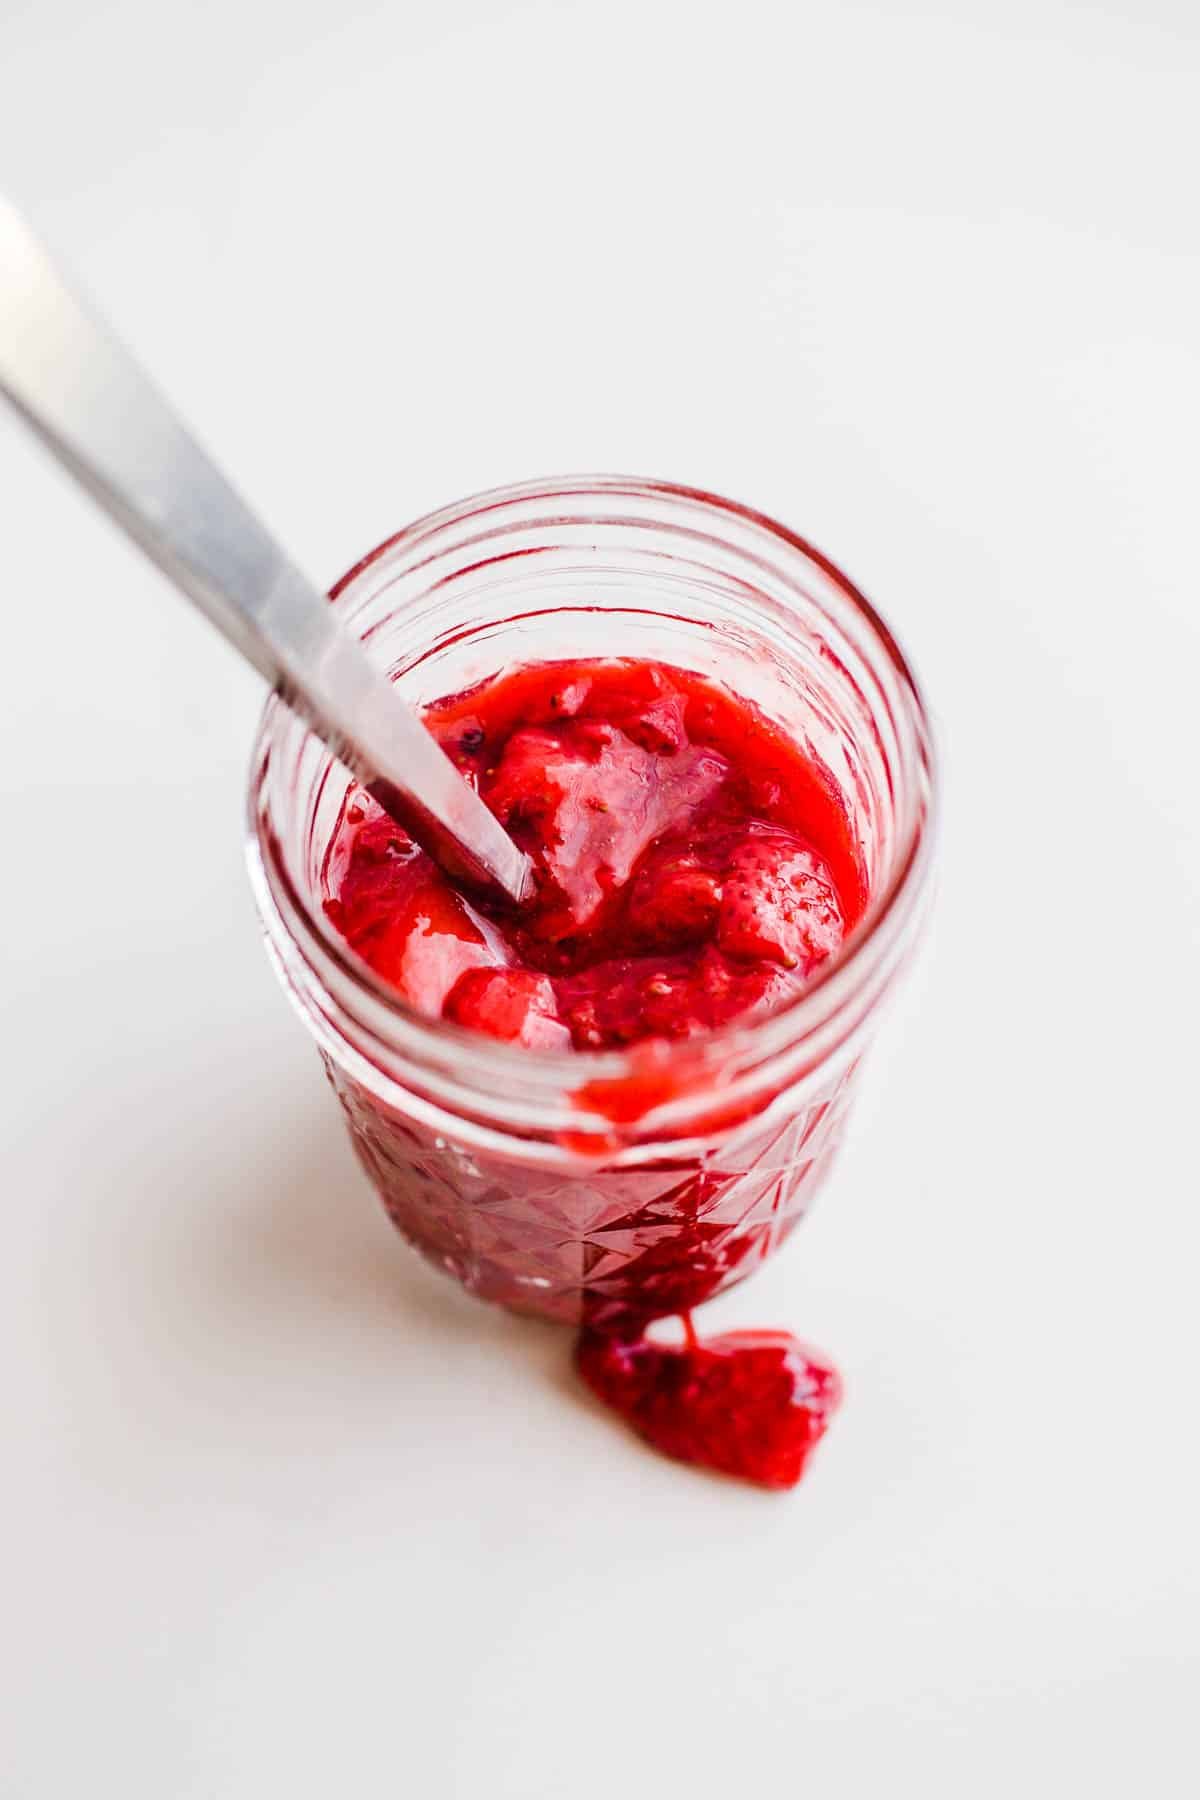 Bright red fruit compote in a glass jelly jar.